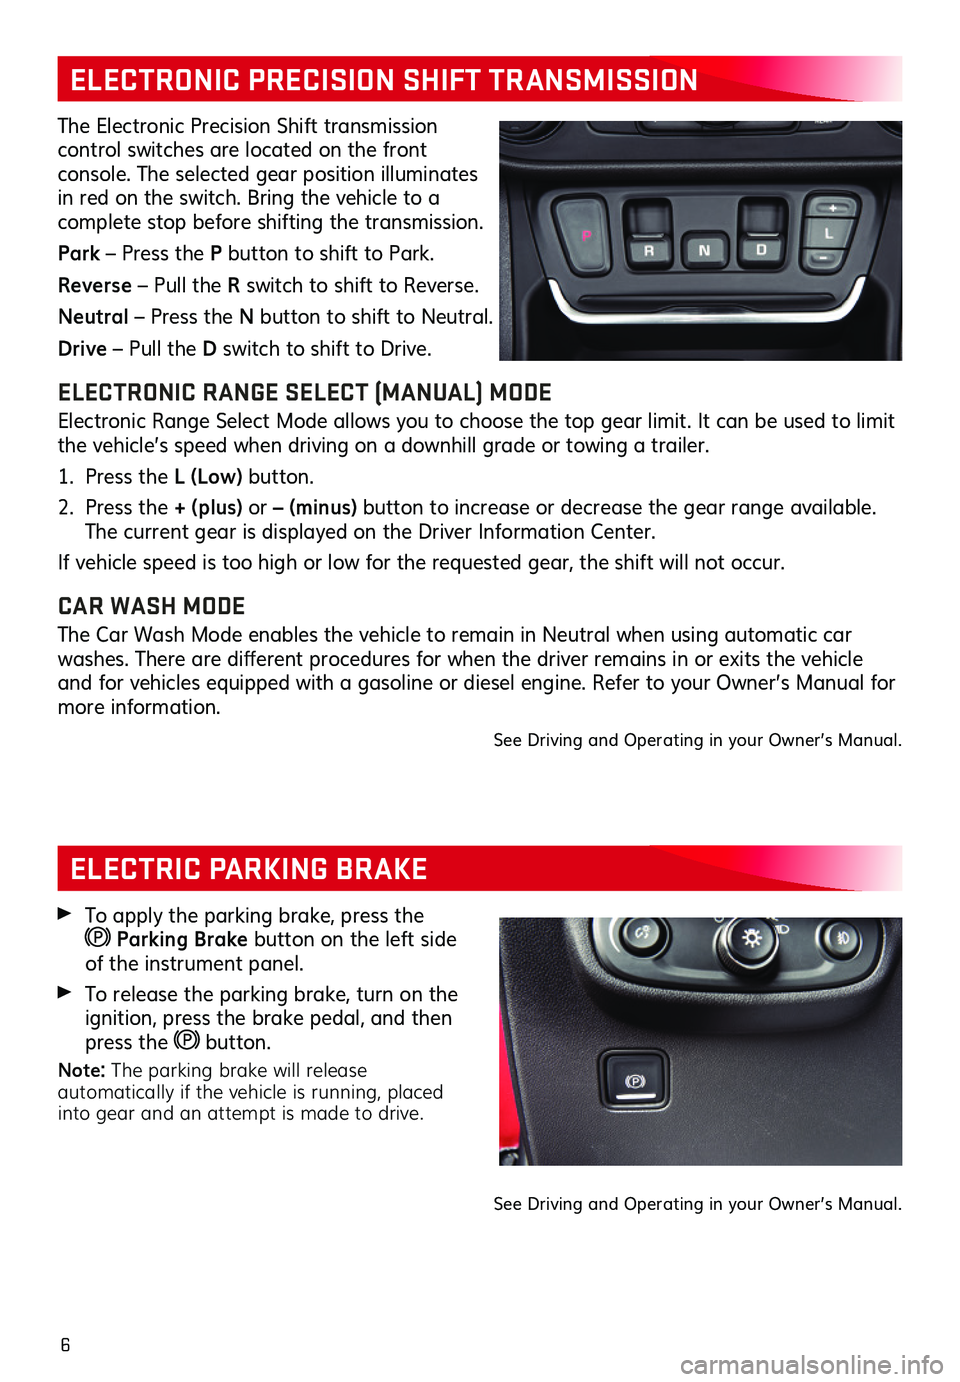 GMC TERRAIN 2019  Get To Know Guide 6
ELECTRIC PARKING BRAKE
ELECTRONIC PRECISION SHIFT TRANSMISSION 
The Electronic Precision Shift transmission  
control switches are located on the front  
console . The selected gear position illumin